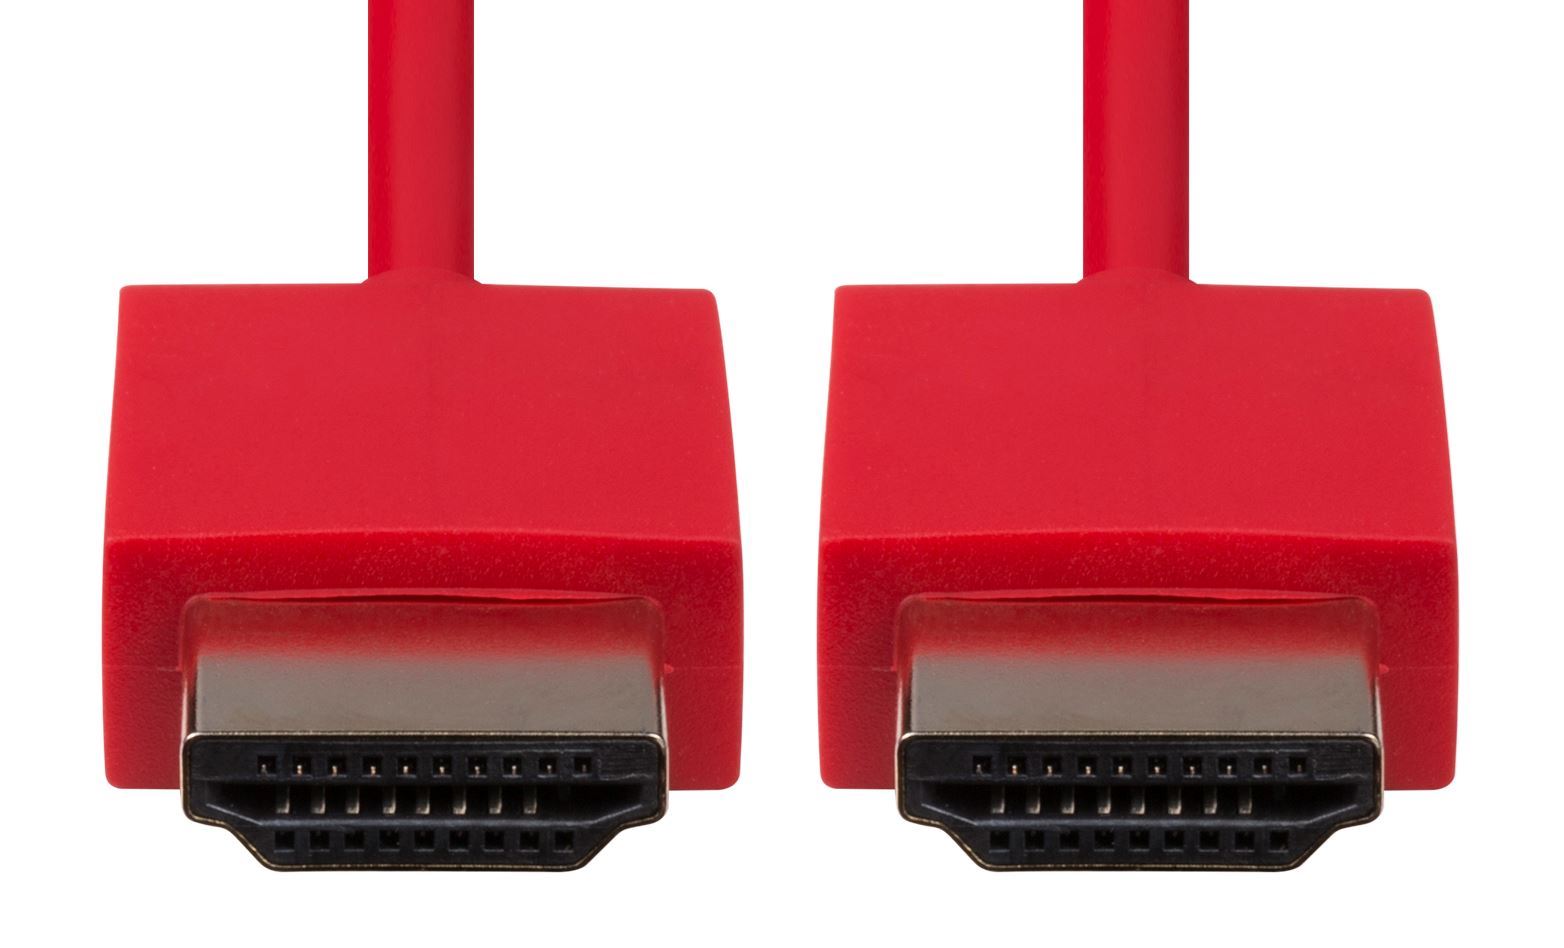 DYNAMIX_1M_HDMI_RED_Nano_High_Speed_With_Ethernet_Cable._Designed_for_UHD_Display_up_to_4K2K@60Hz._Slimline_Robust_Cable._Supports_CEC_2.0,_3D,_&_ARC._Supports_Up_to_32_Audio_Channels. 770